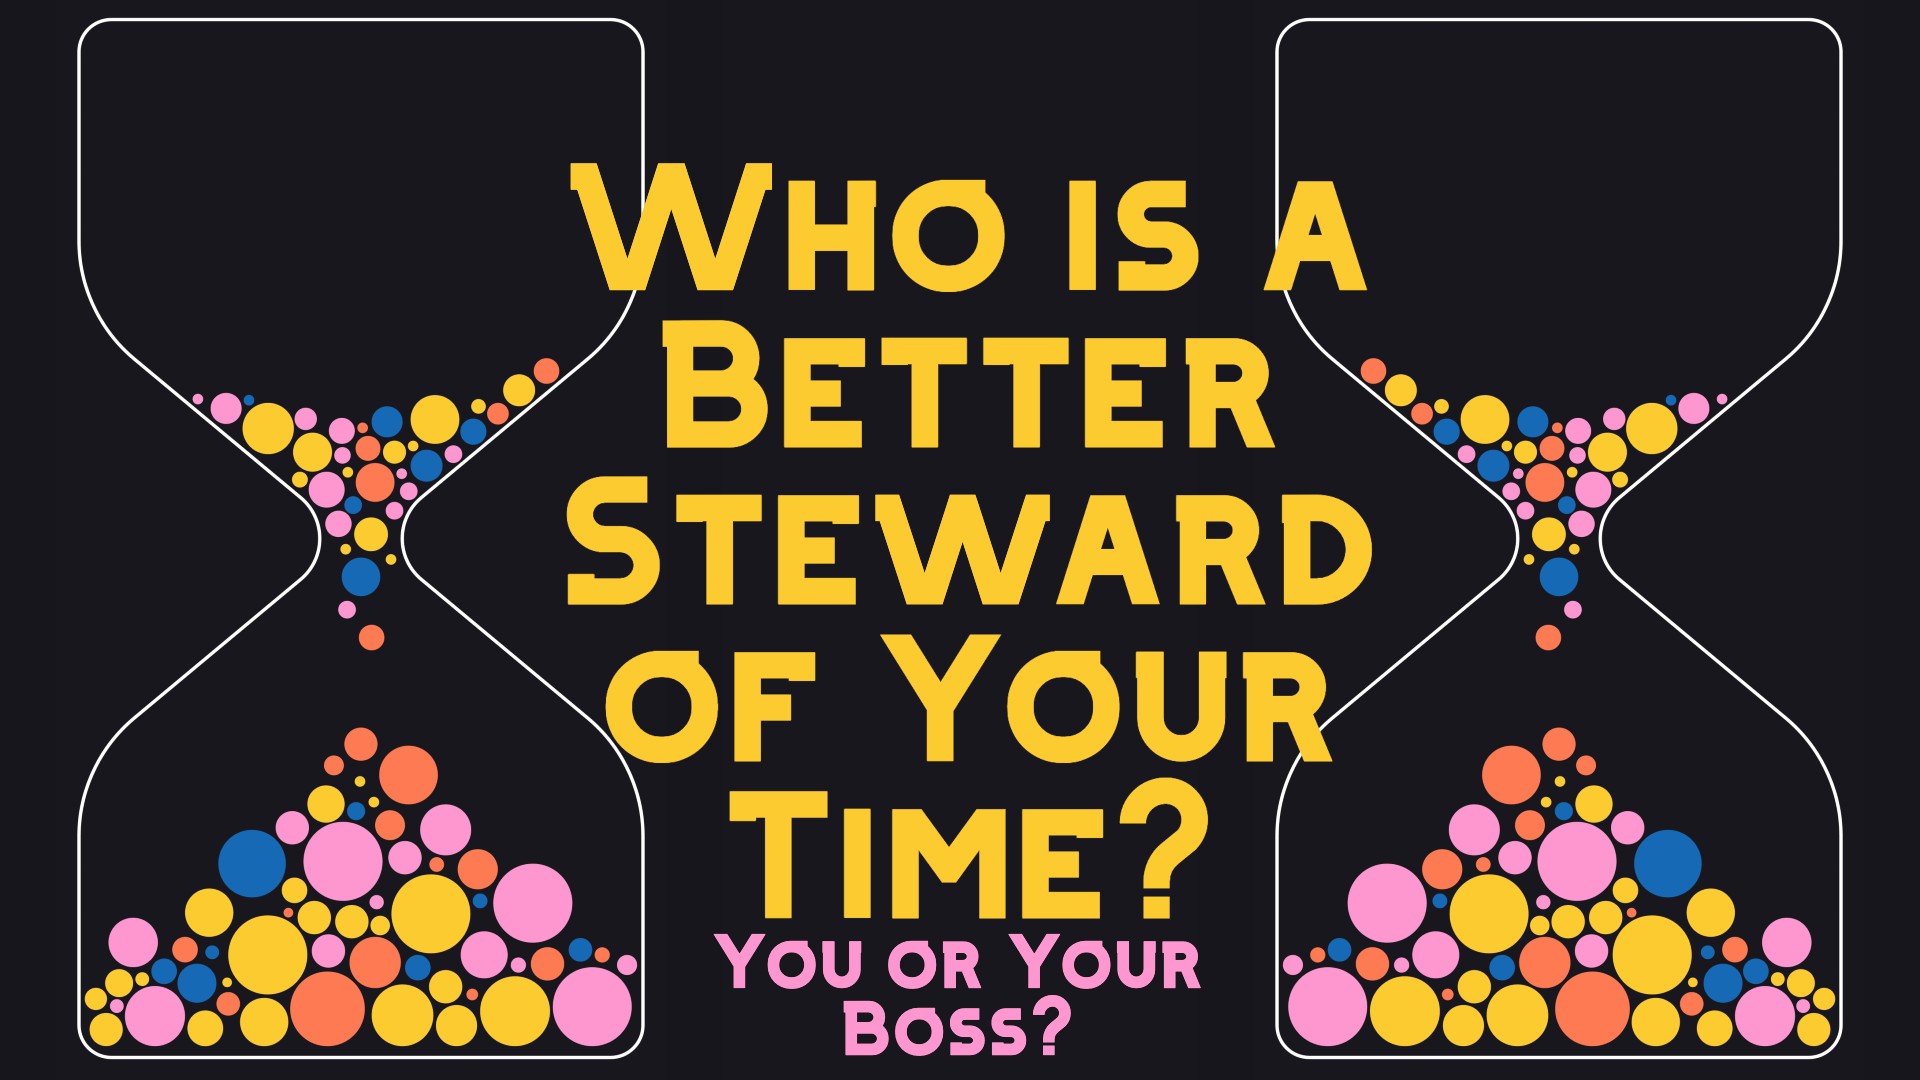 Who is a Better Steward of Your Time?